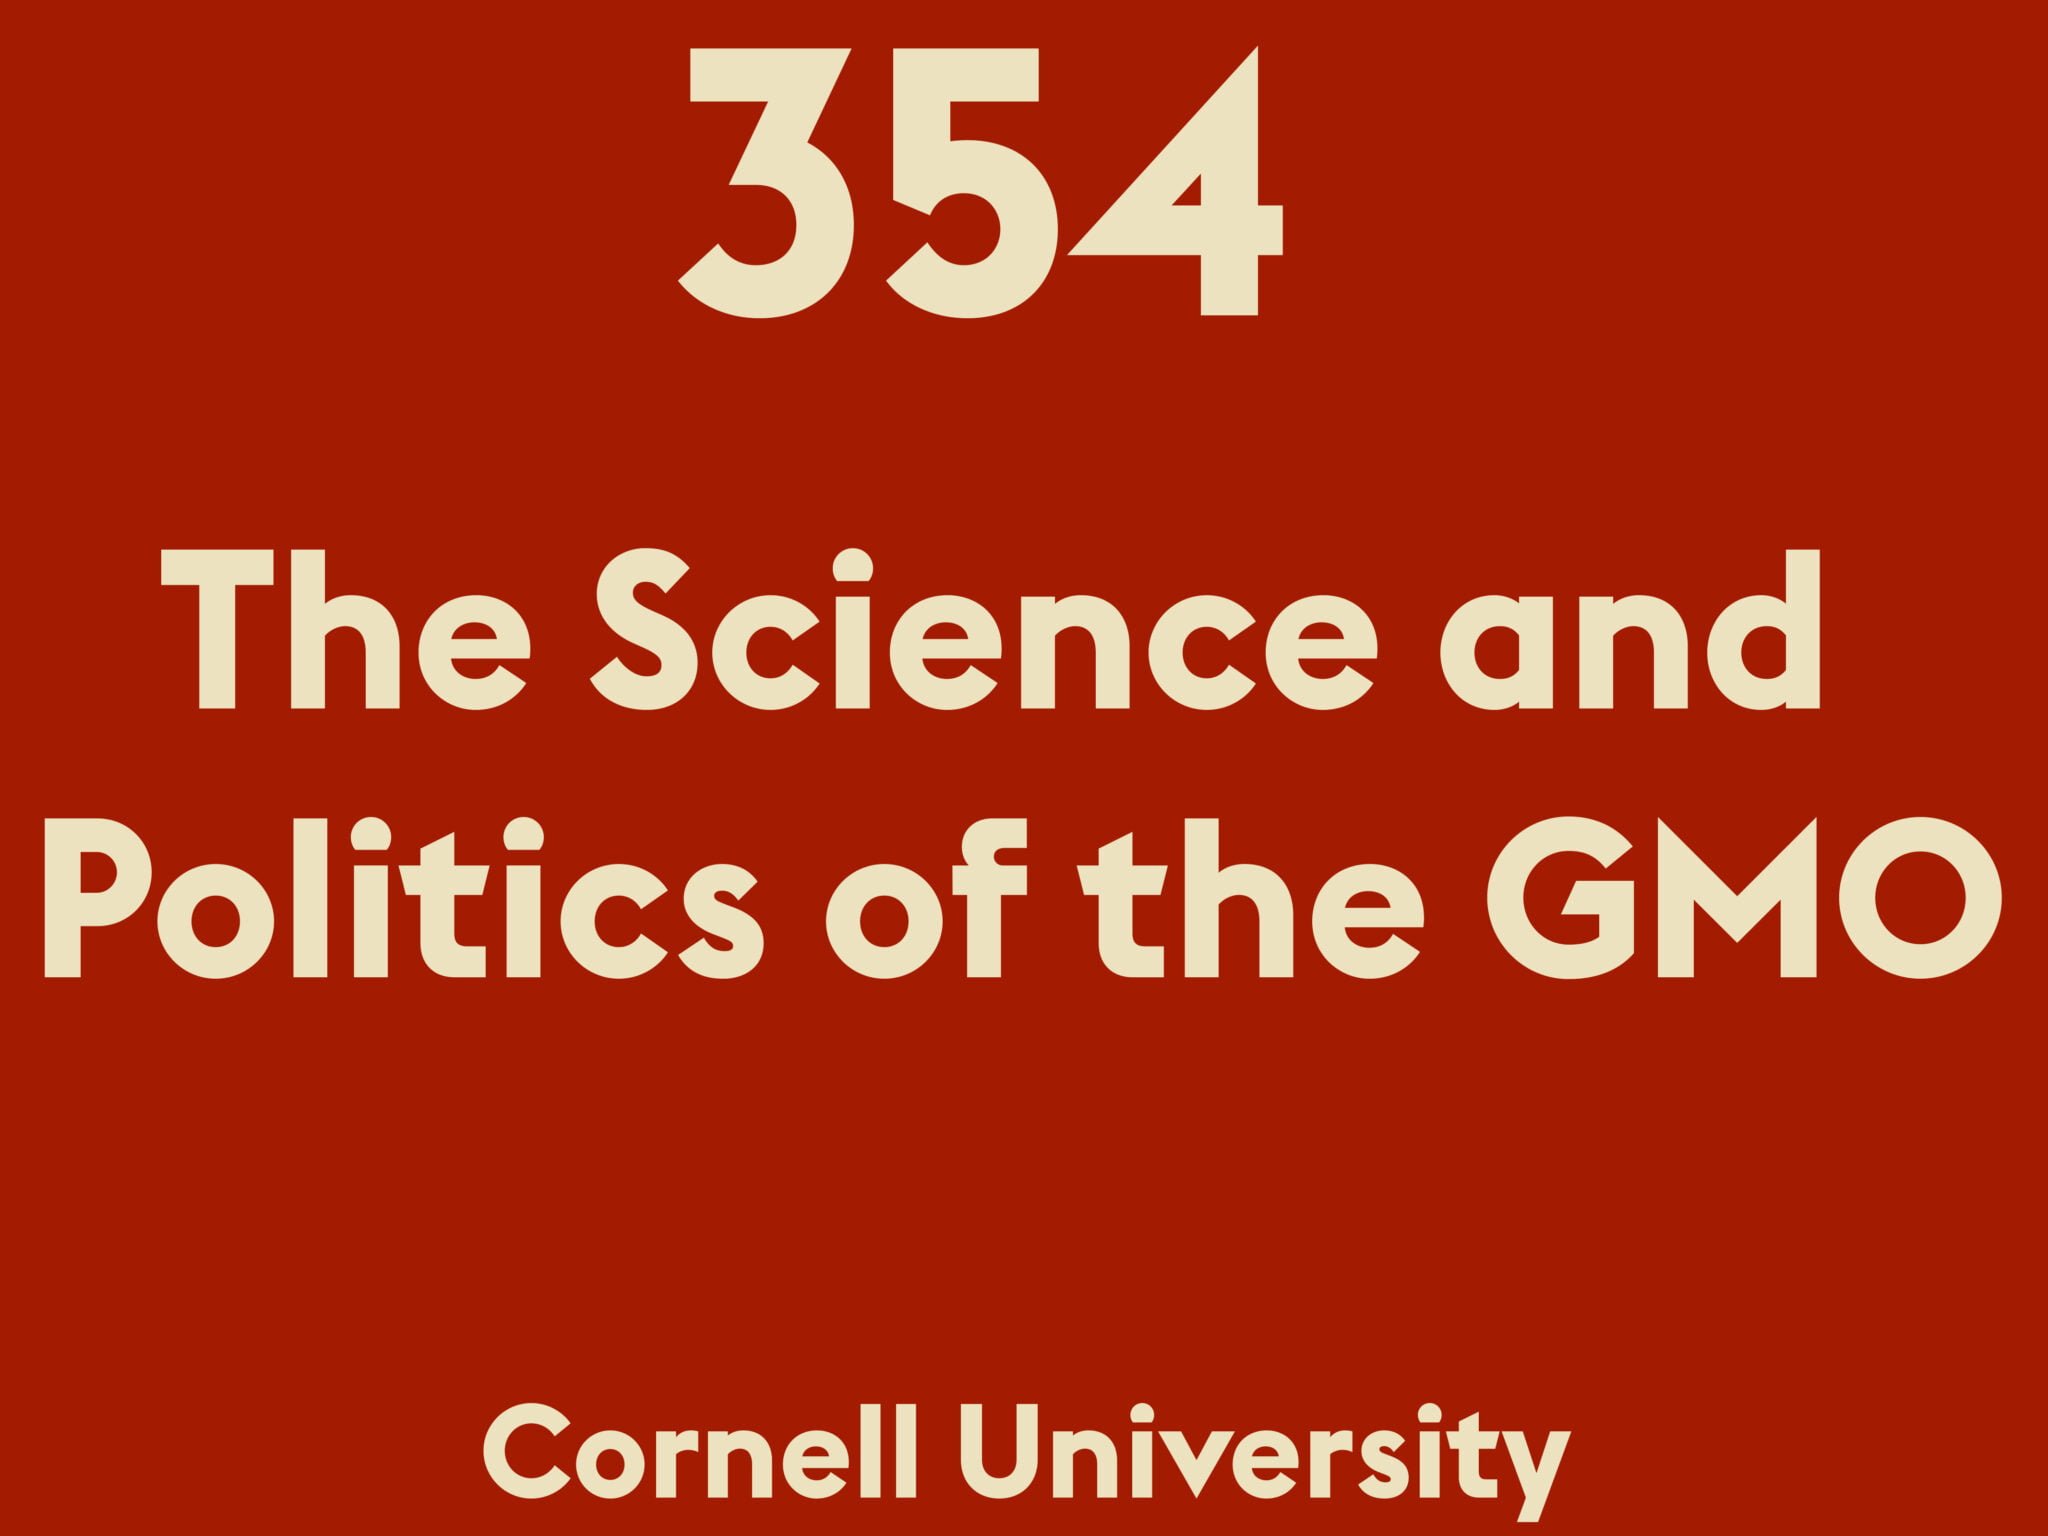 The Science and Politics of the GMO